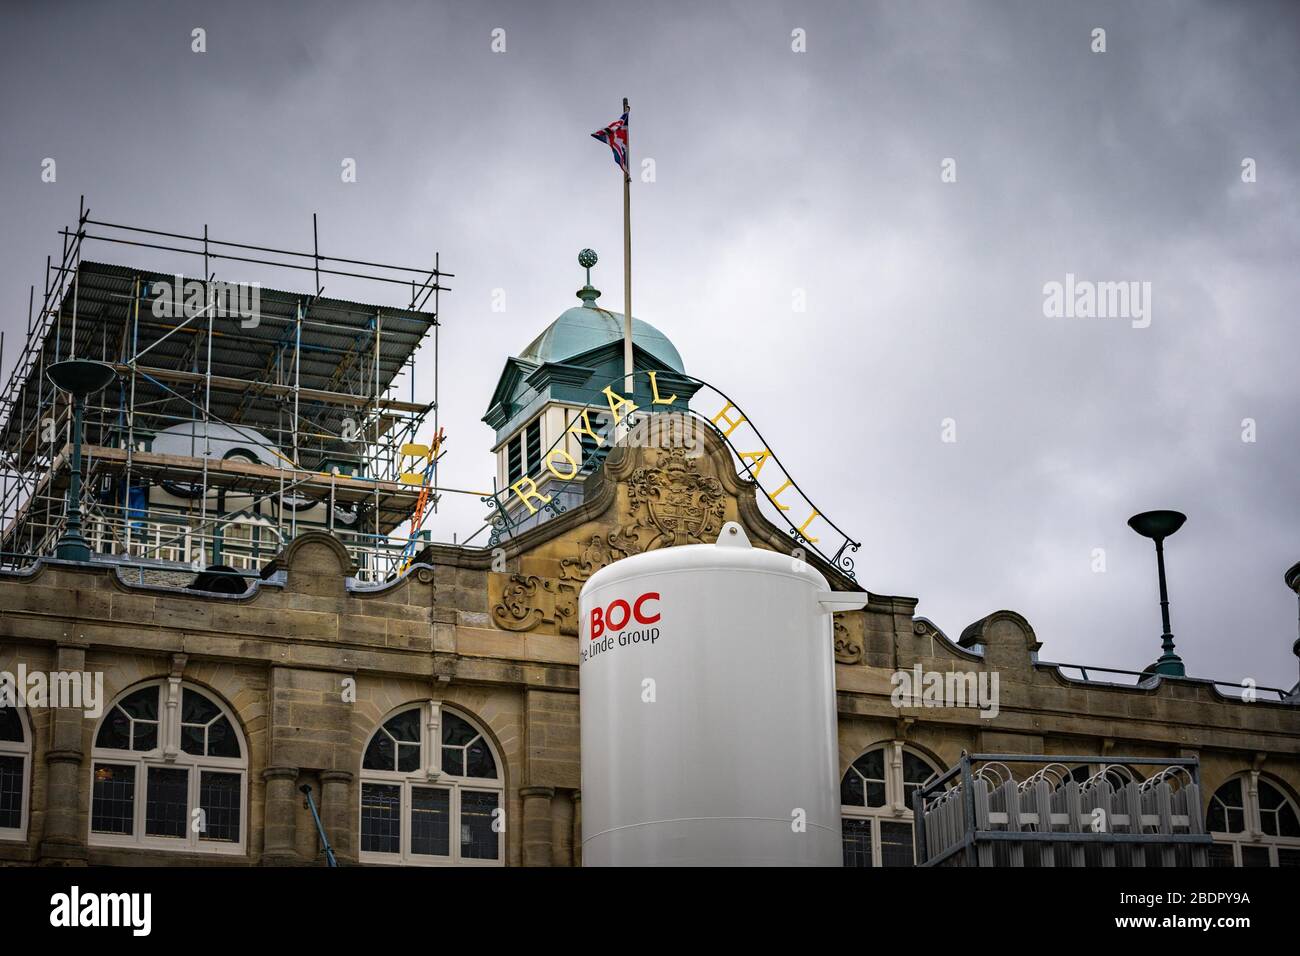 Nightingale Hospital, Yorkshire and Humber, Harrogate, United Kingdom. 9th April, 2020. Preparations for opening the Nightingale Hospital in Harrogate, North Yorkshire, UK are well advanced. Credit: Caught Light Photography/Alamy Live News. Stock Photo